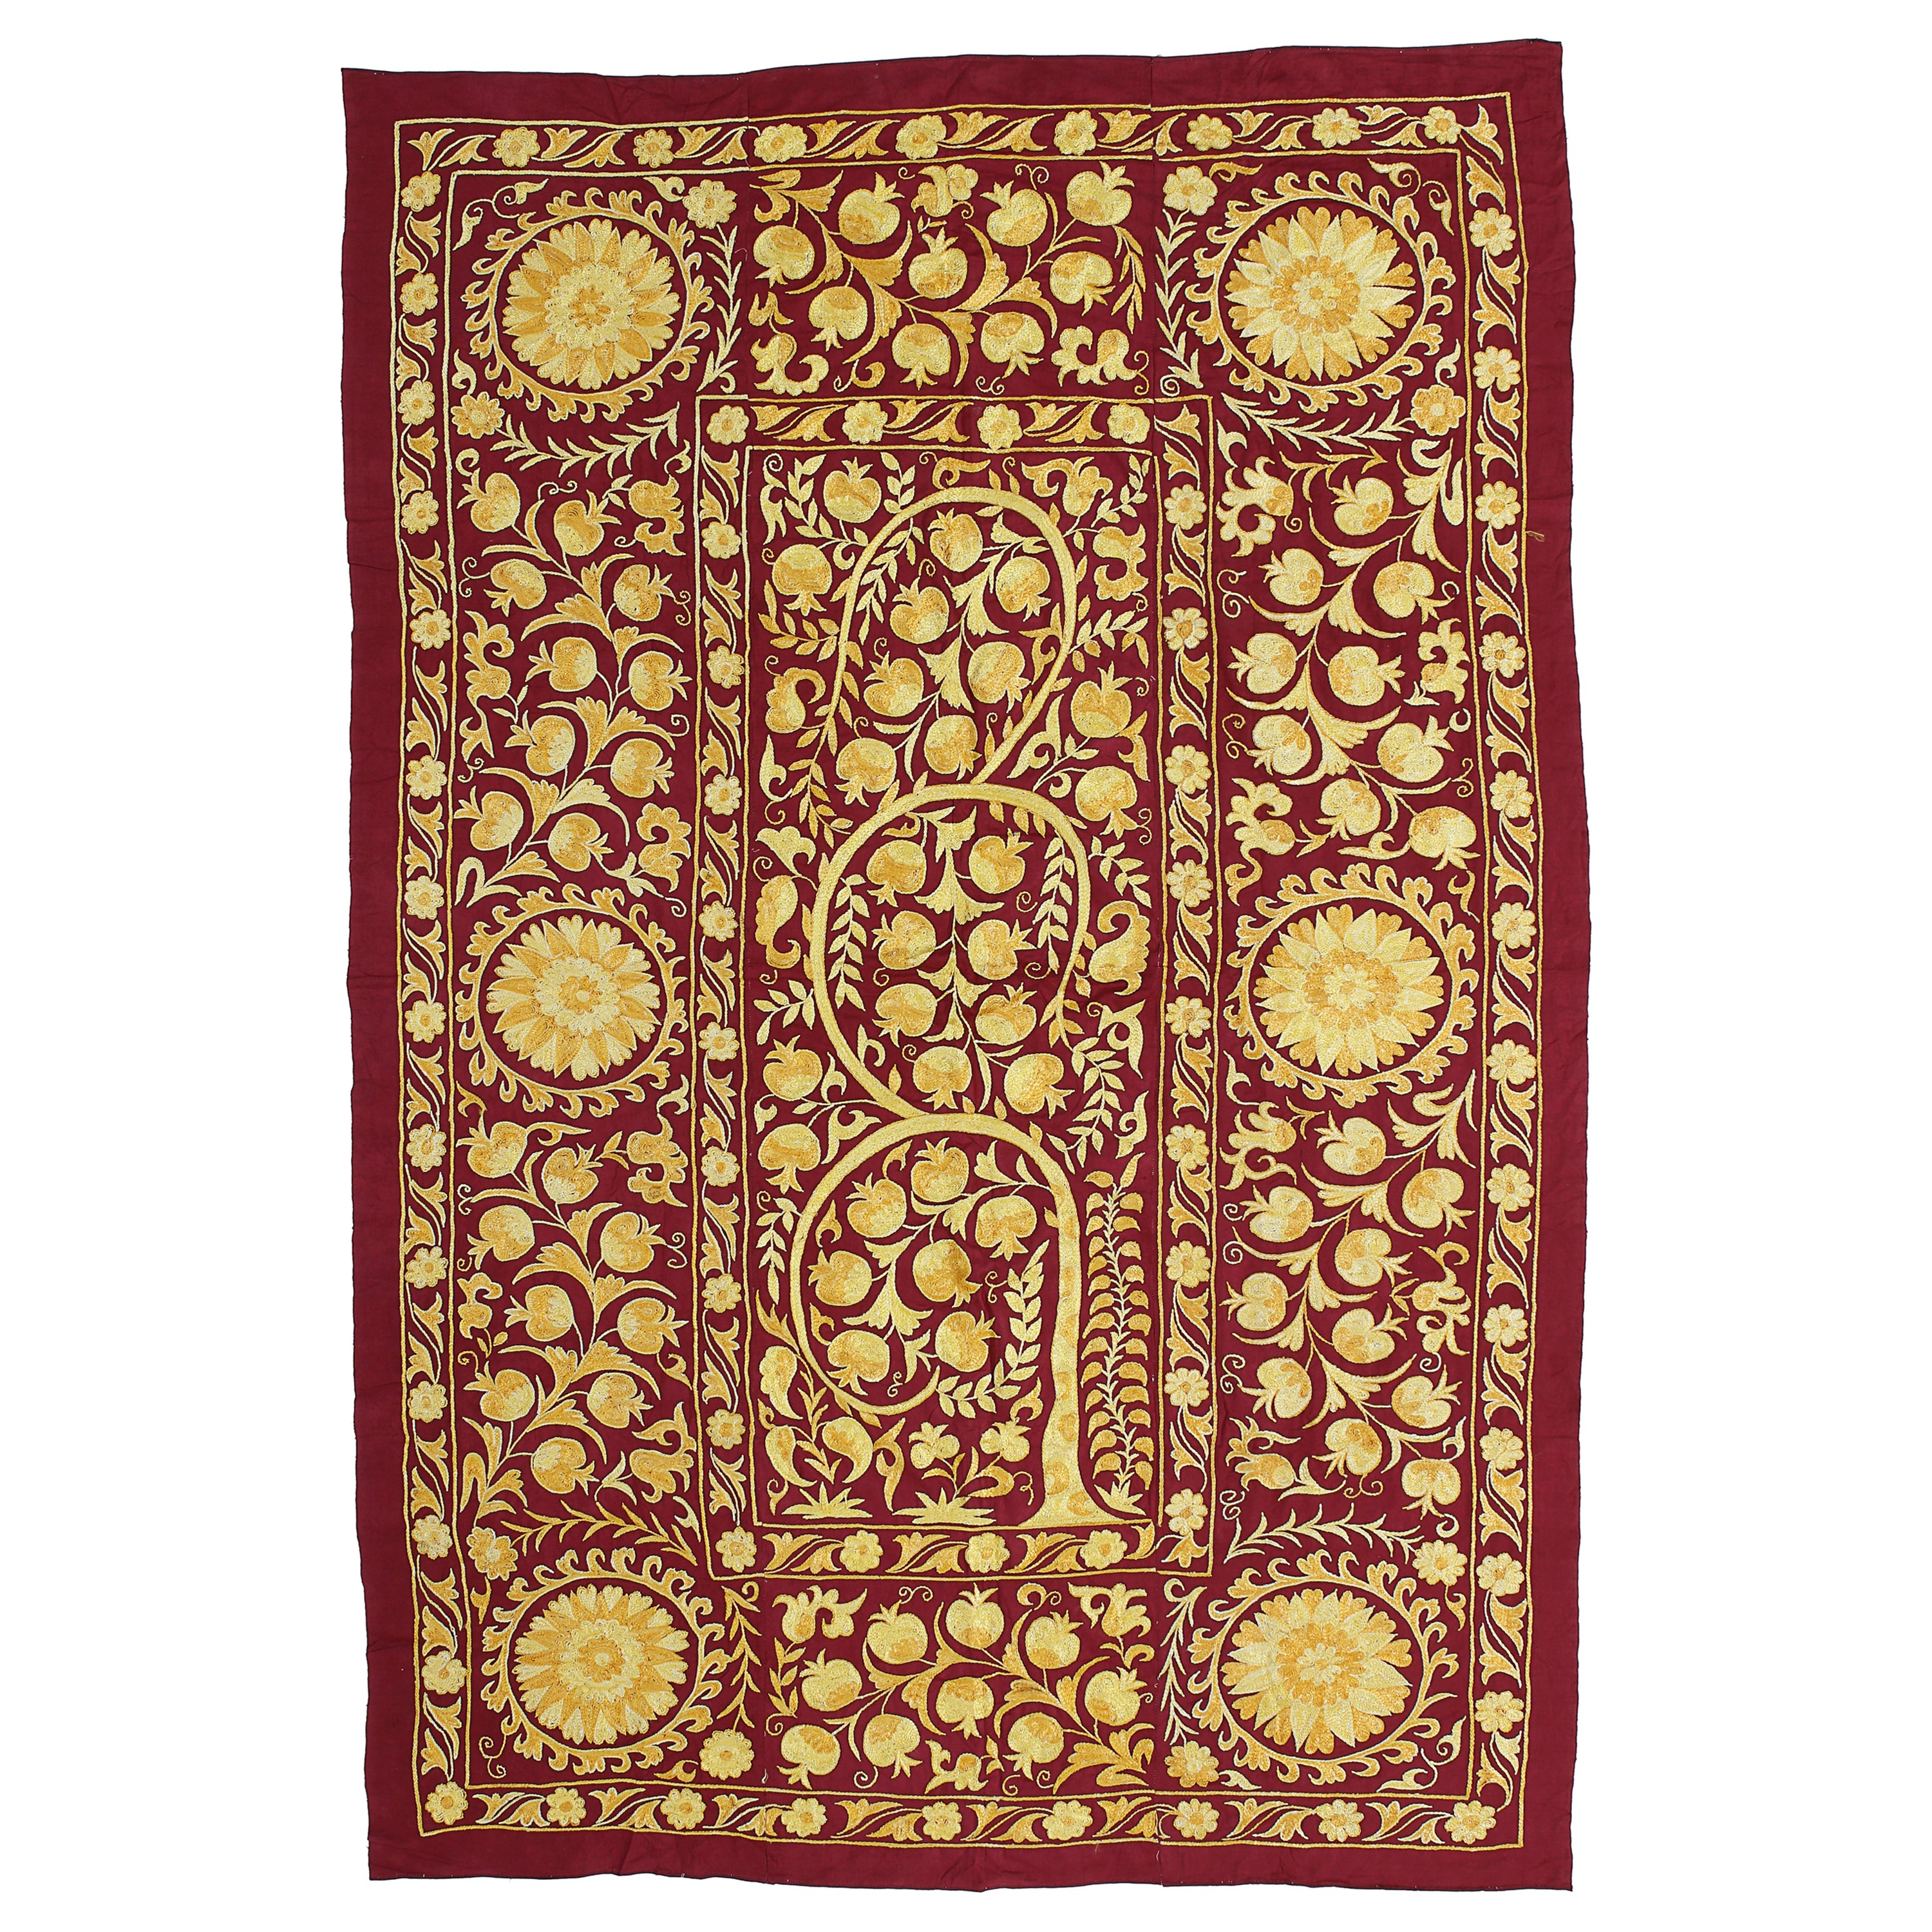 4.8x7 Ft Uzbek Silk Embroidery Wall Hanging, Burgundy Red and Yellow Bed Cover For Sale